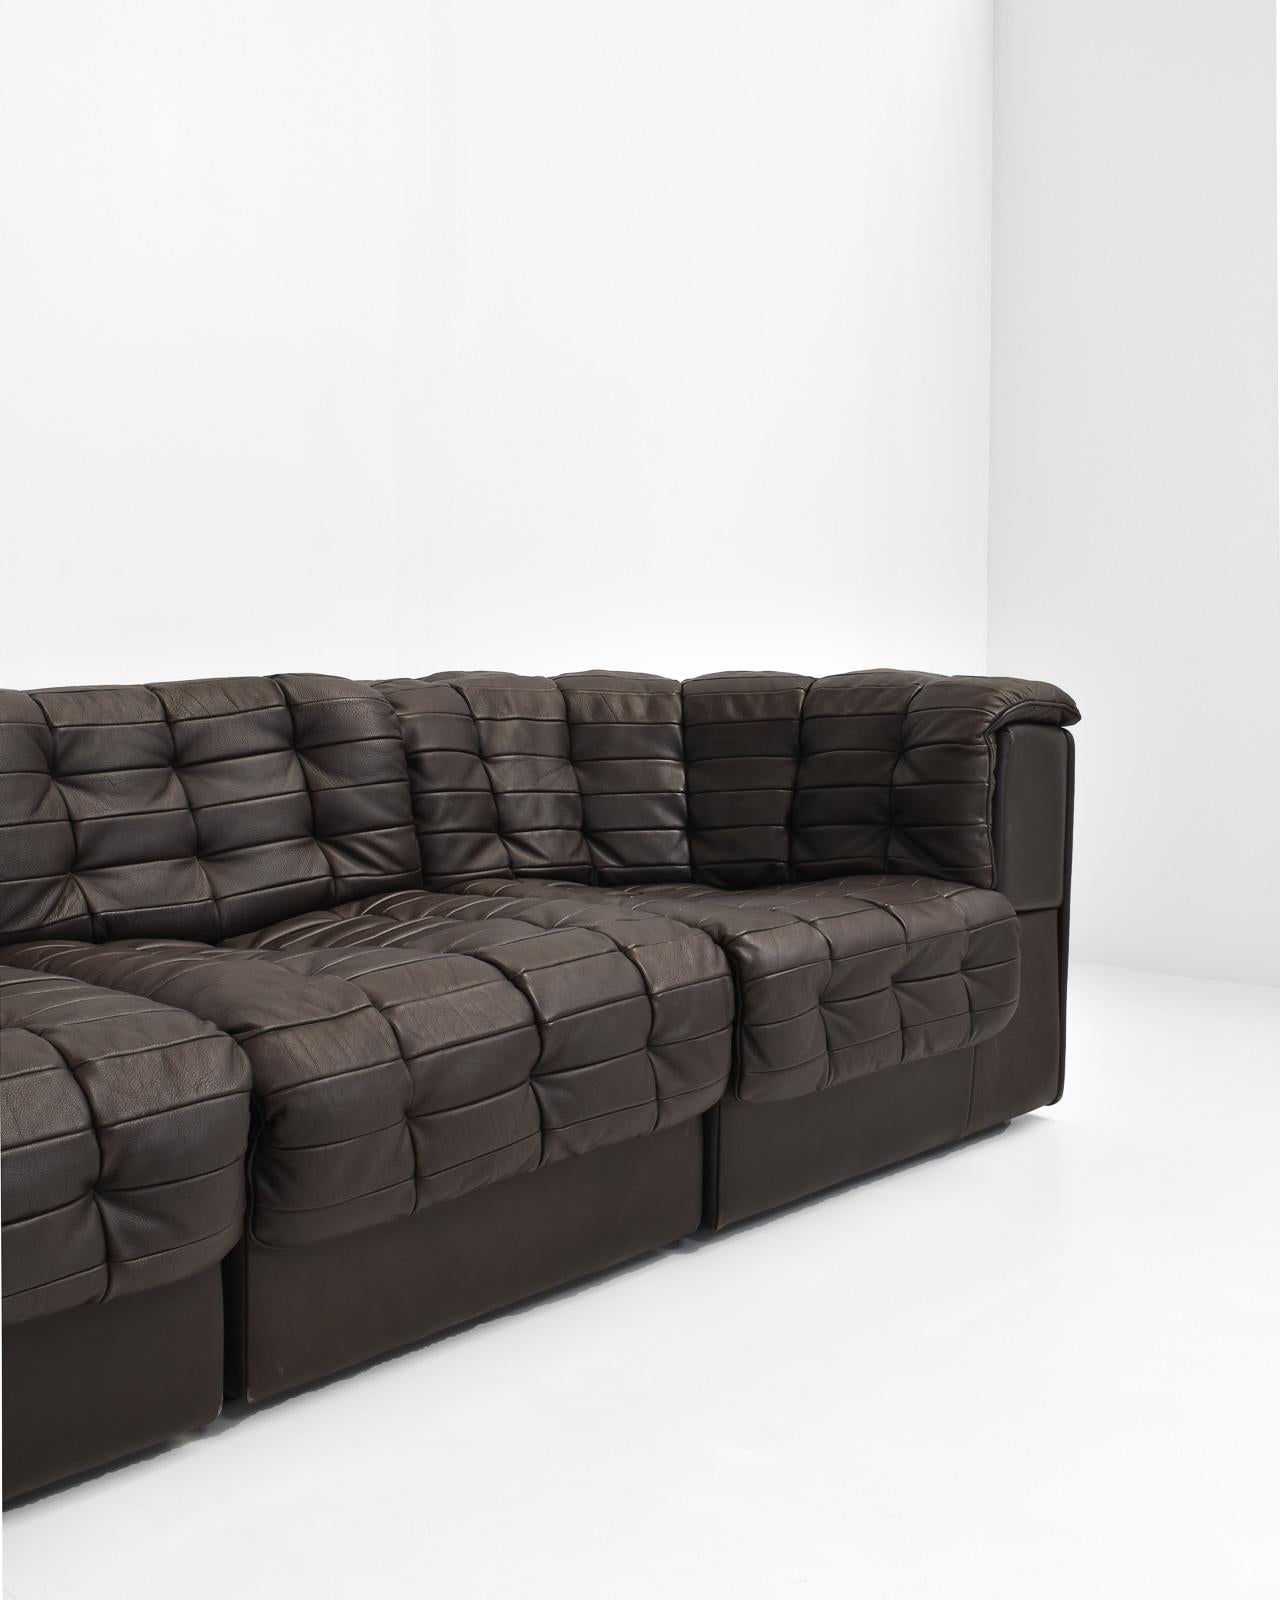 Modular Patchwork Leather Sofa by De Sede, Model 'DS11' 4